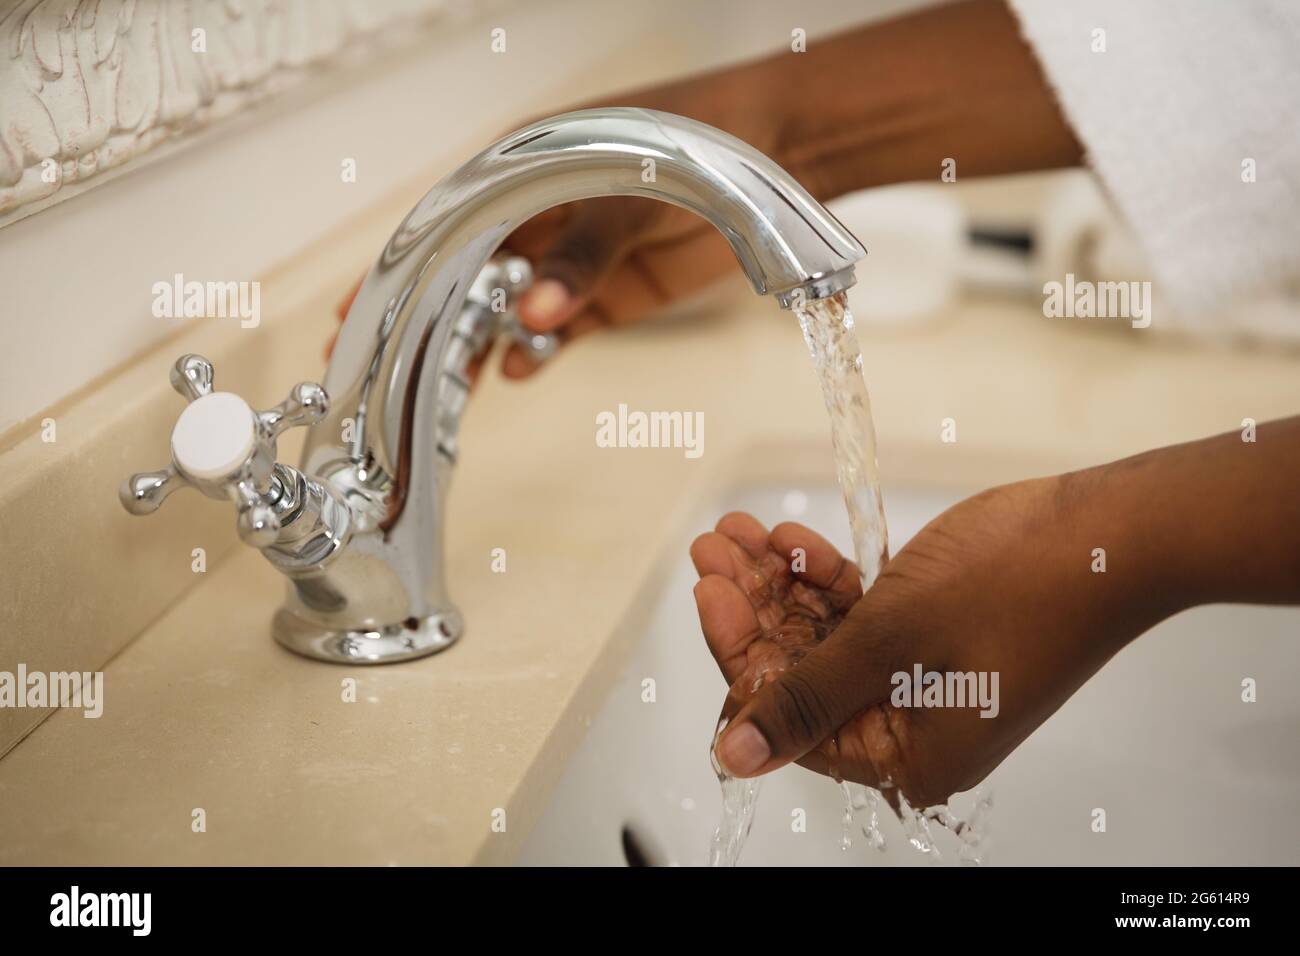 Midsection of african american woman in bathroom wearing bathrobe washing hands in basin Stock Photo